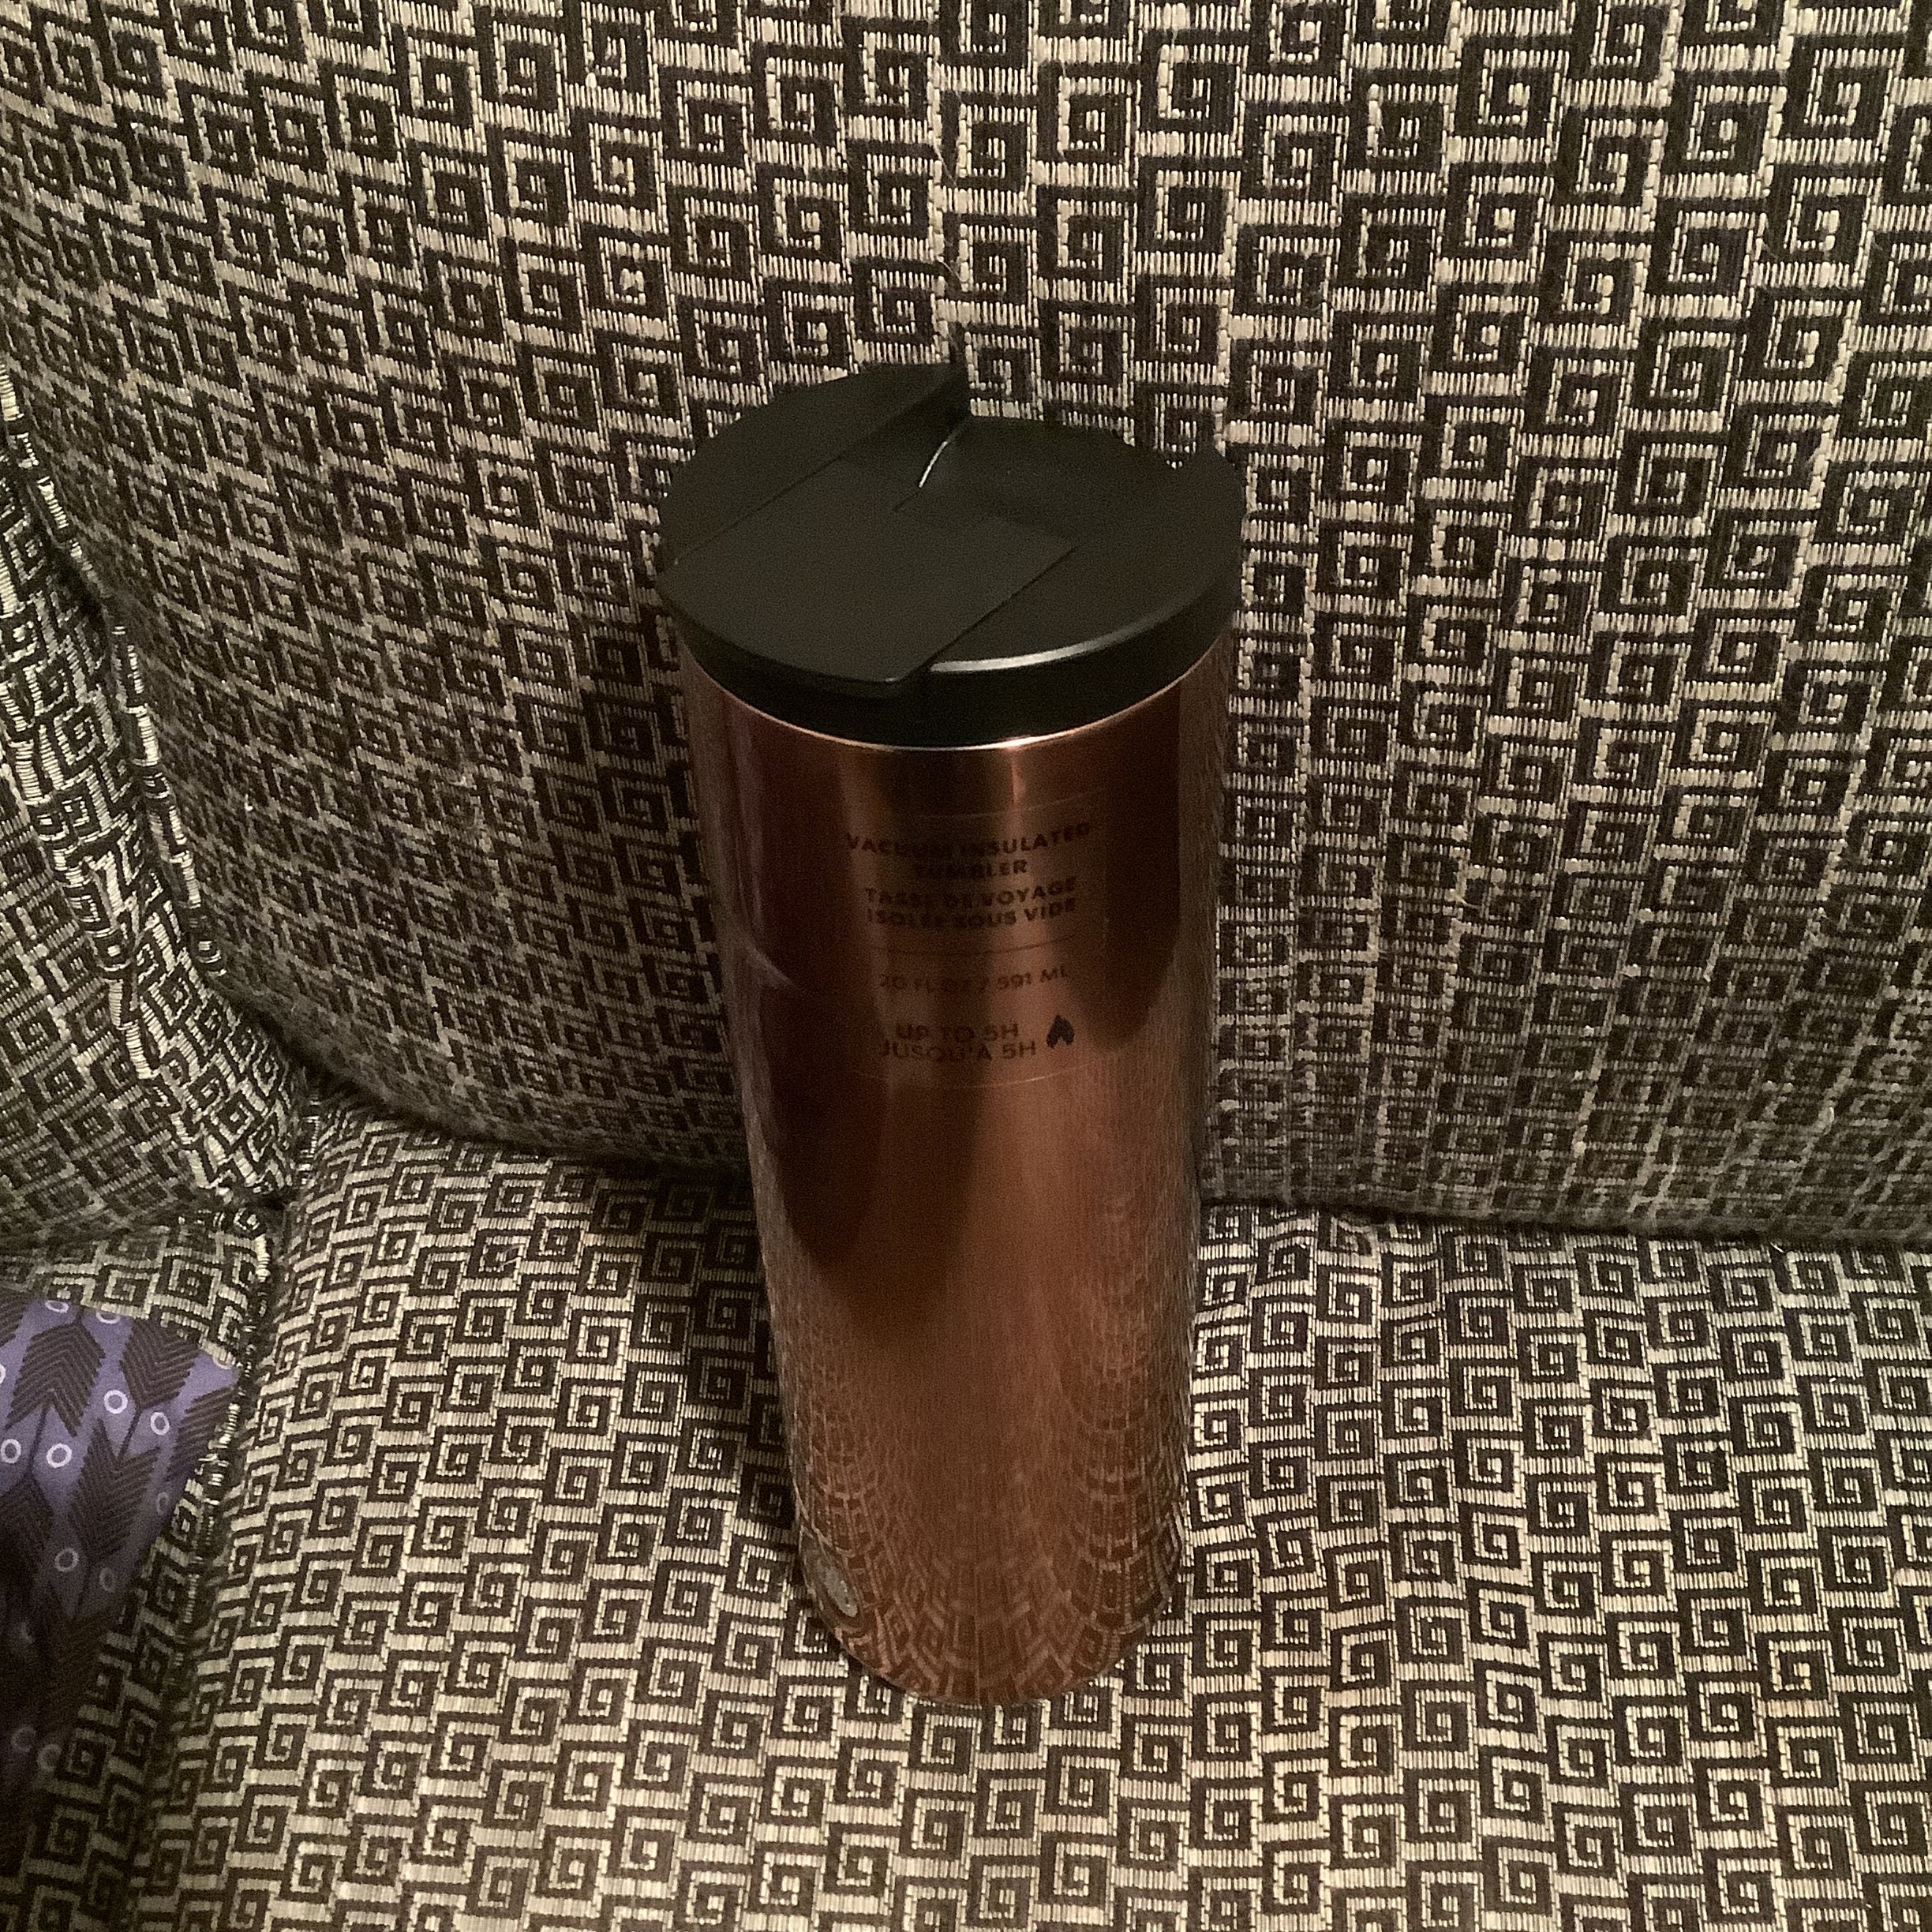 Rose Gold Tumbler with Matte Black Personalized Starbucks Logo Decal - 20  oz Double Wall Insulated Tumbler with sipper lid and straw – SheltonShirts